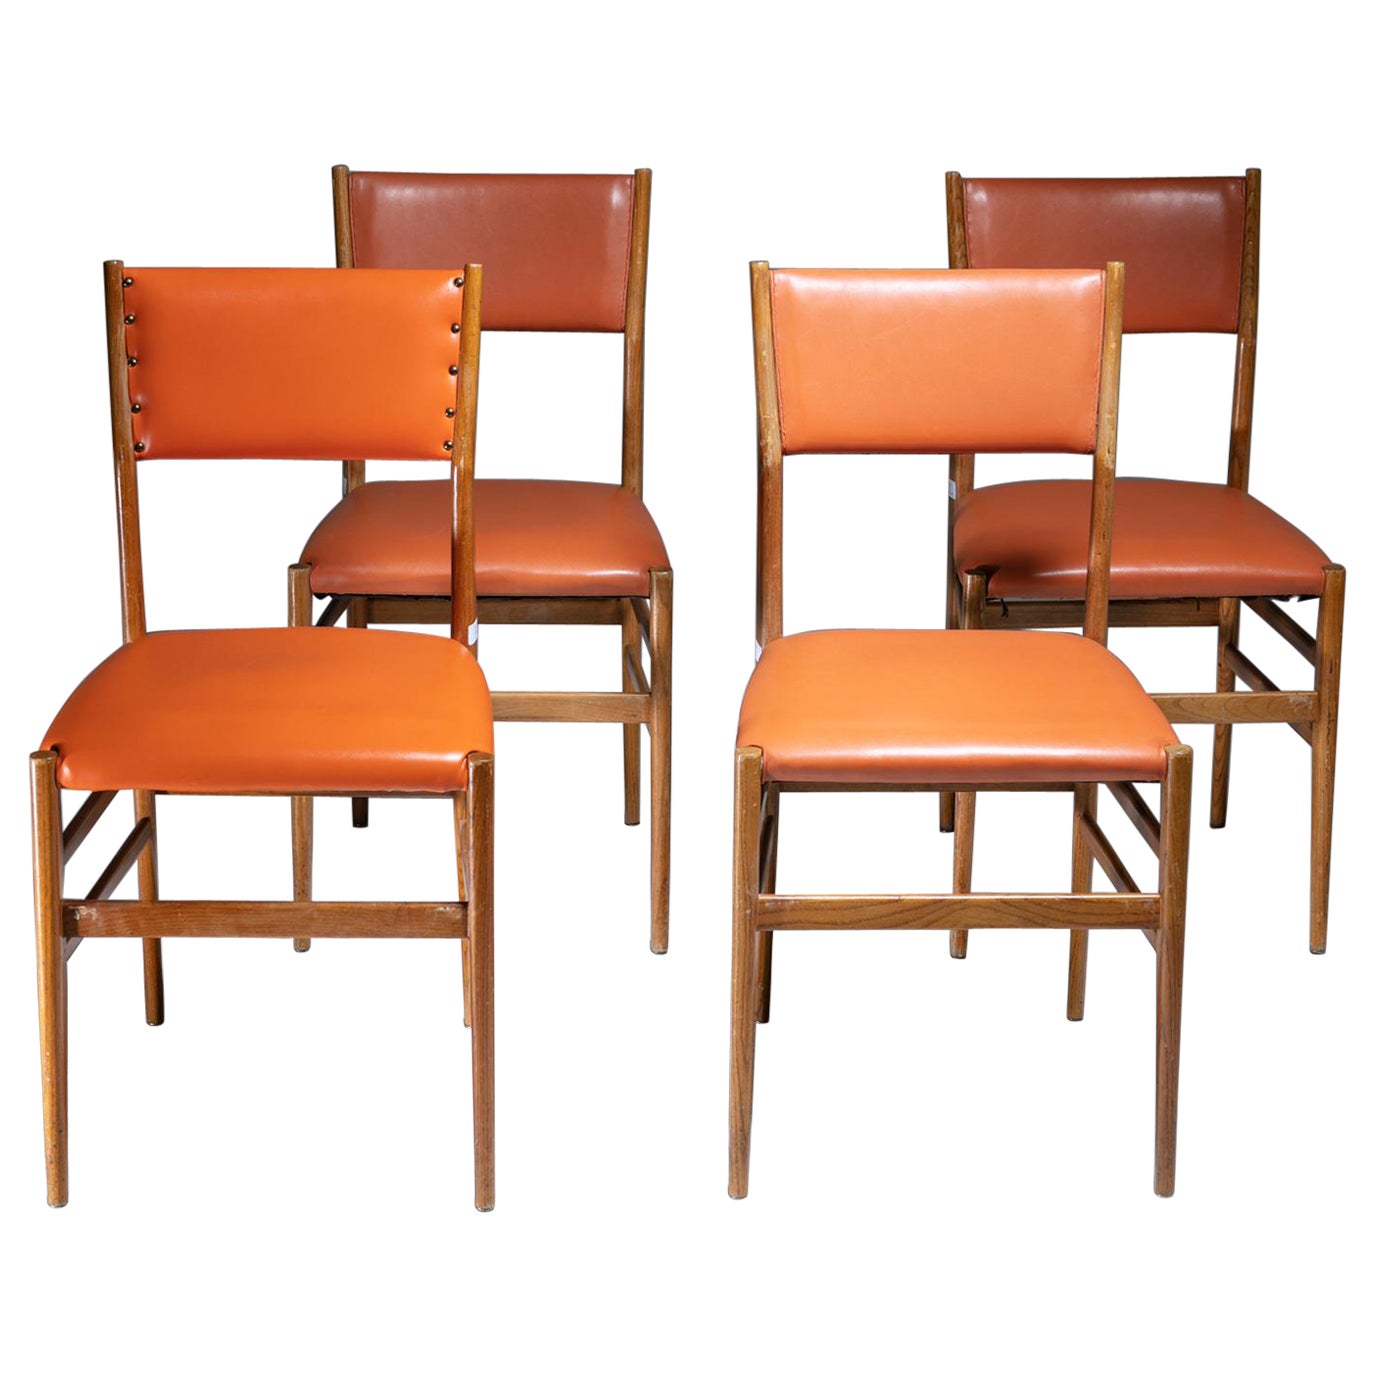 Set of 4 Orange Leather "Leggera" Chairs by Gio Ponti for Cassina, Italy, 1950s